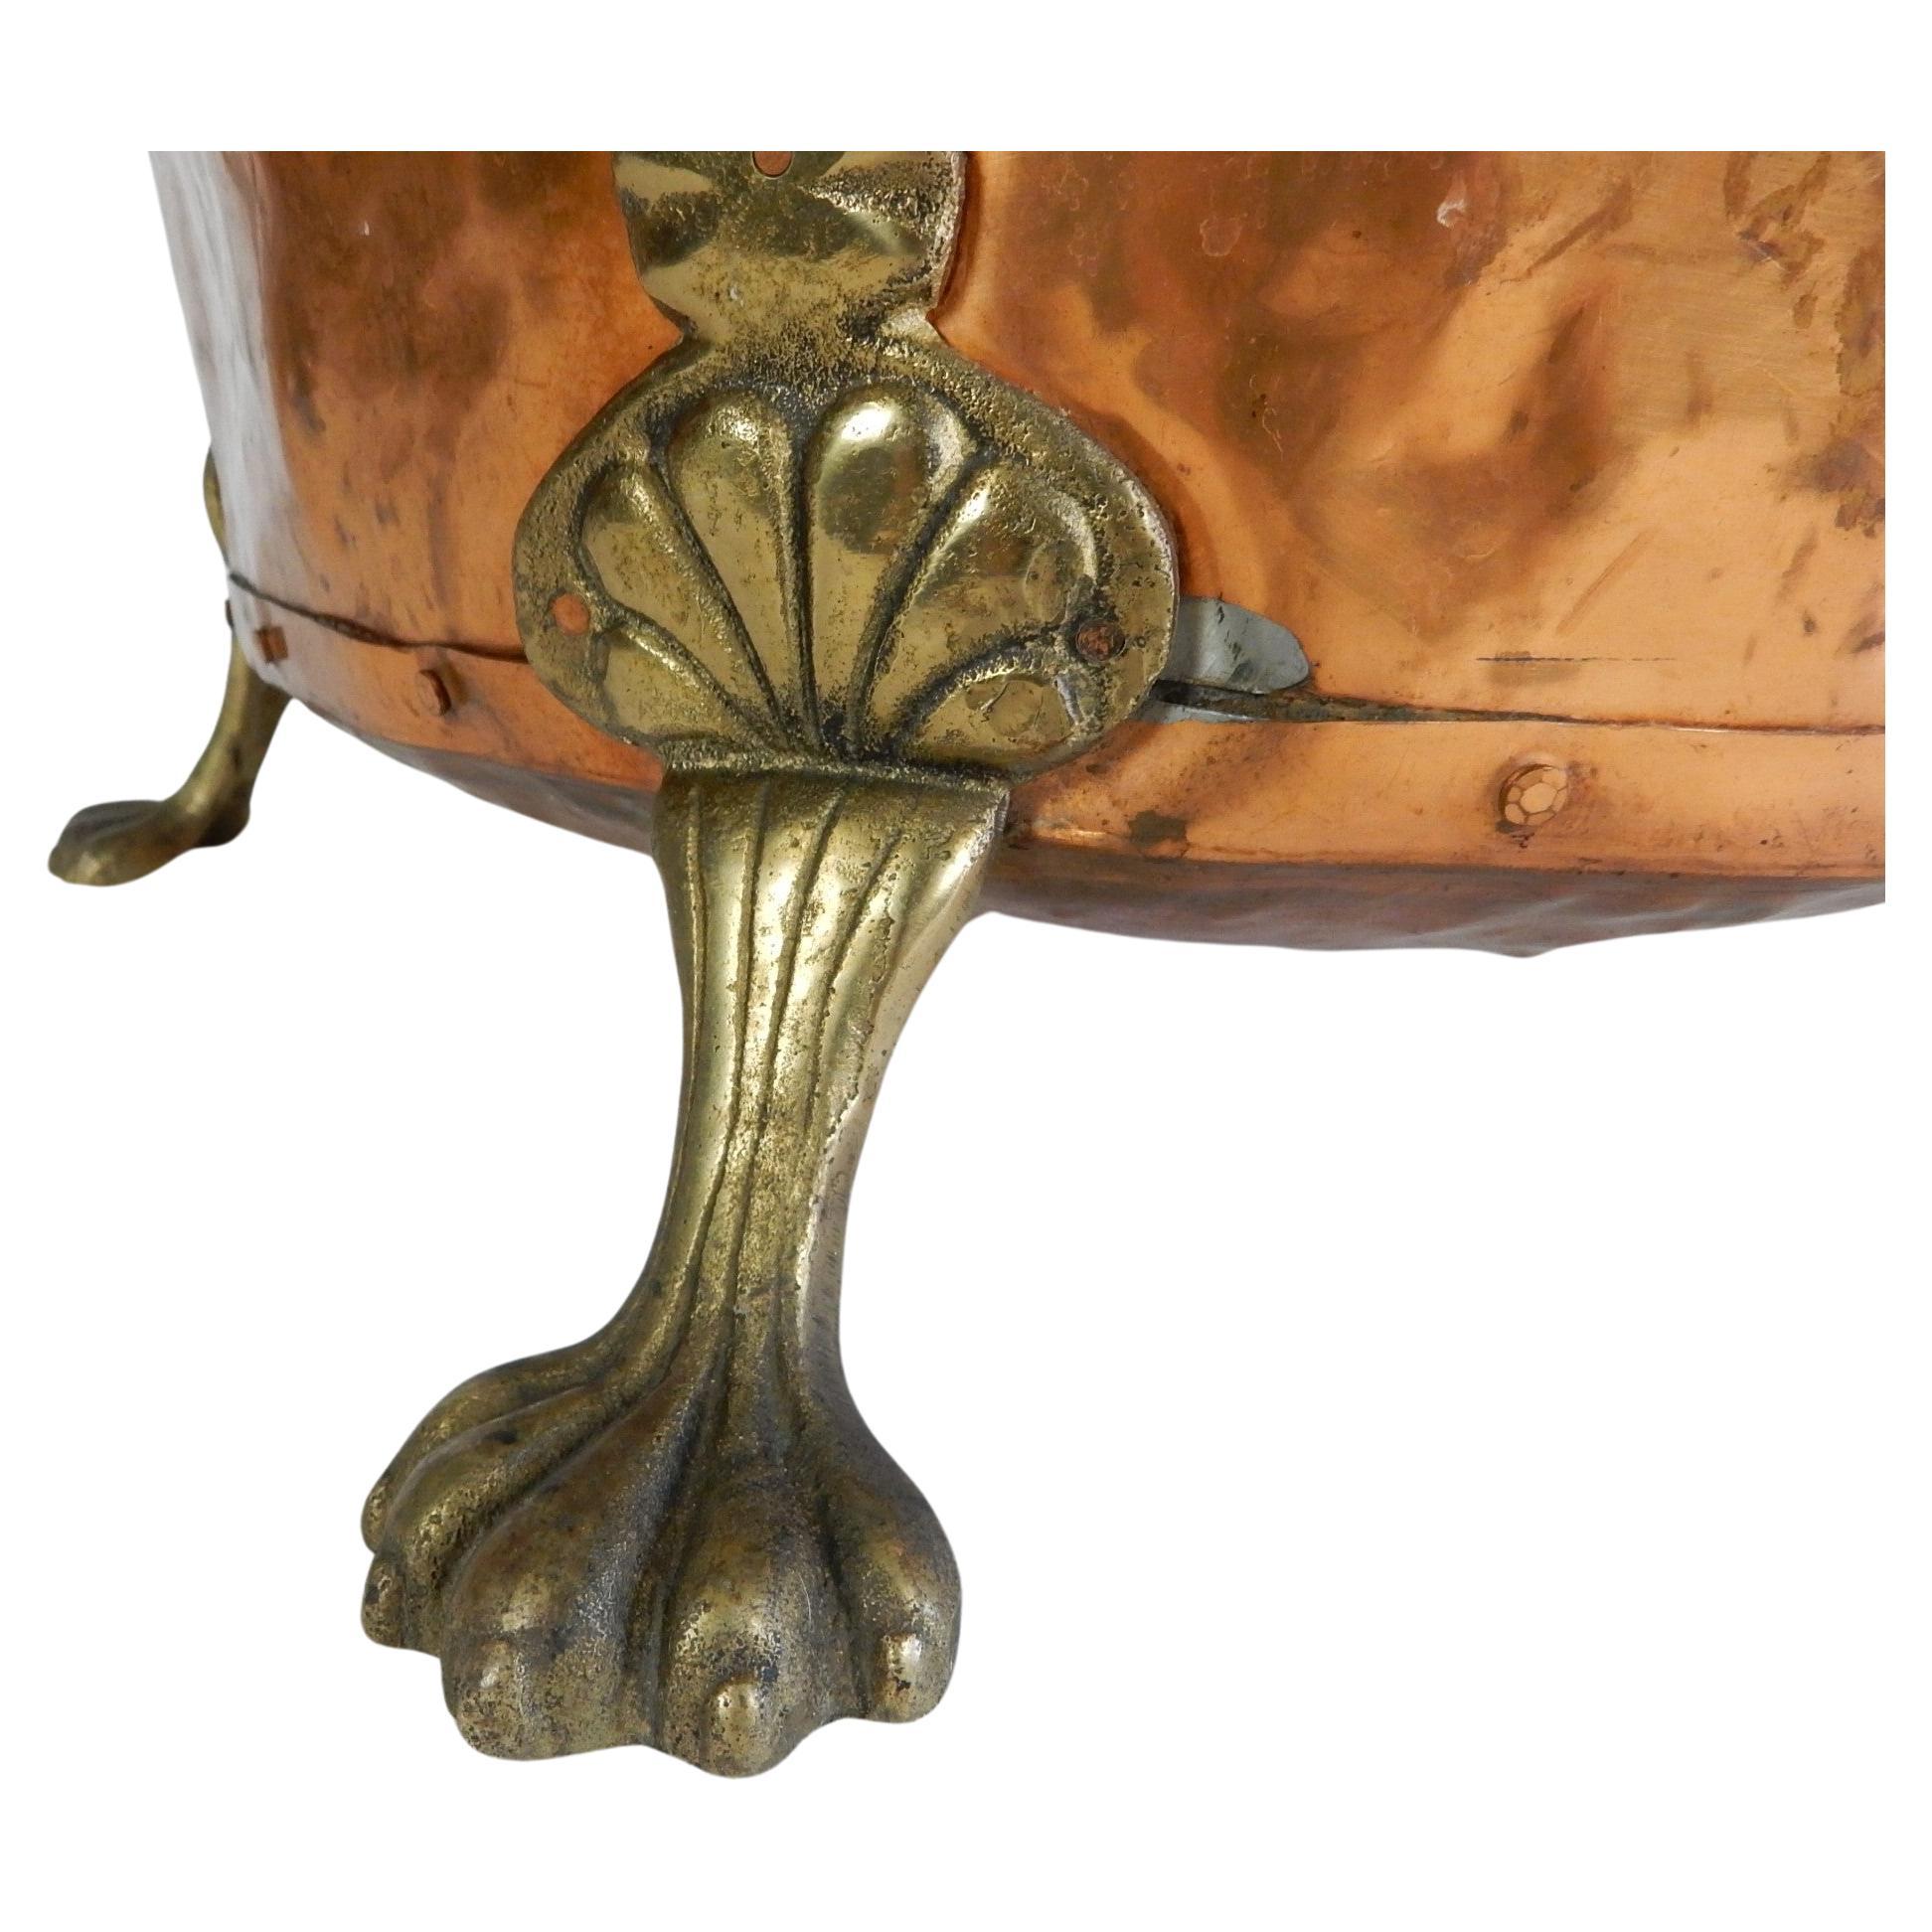 Classic Baroque Revival hammered copper log bin, planter or wine cooler with large claw feet and lion medallion handles.
Well used but still retains all parts and a lovely aged patina.
Large piece measuring 18